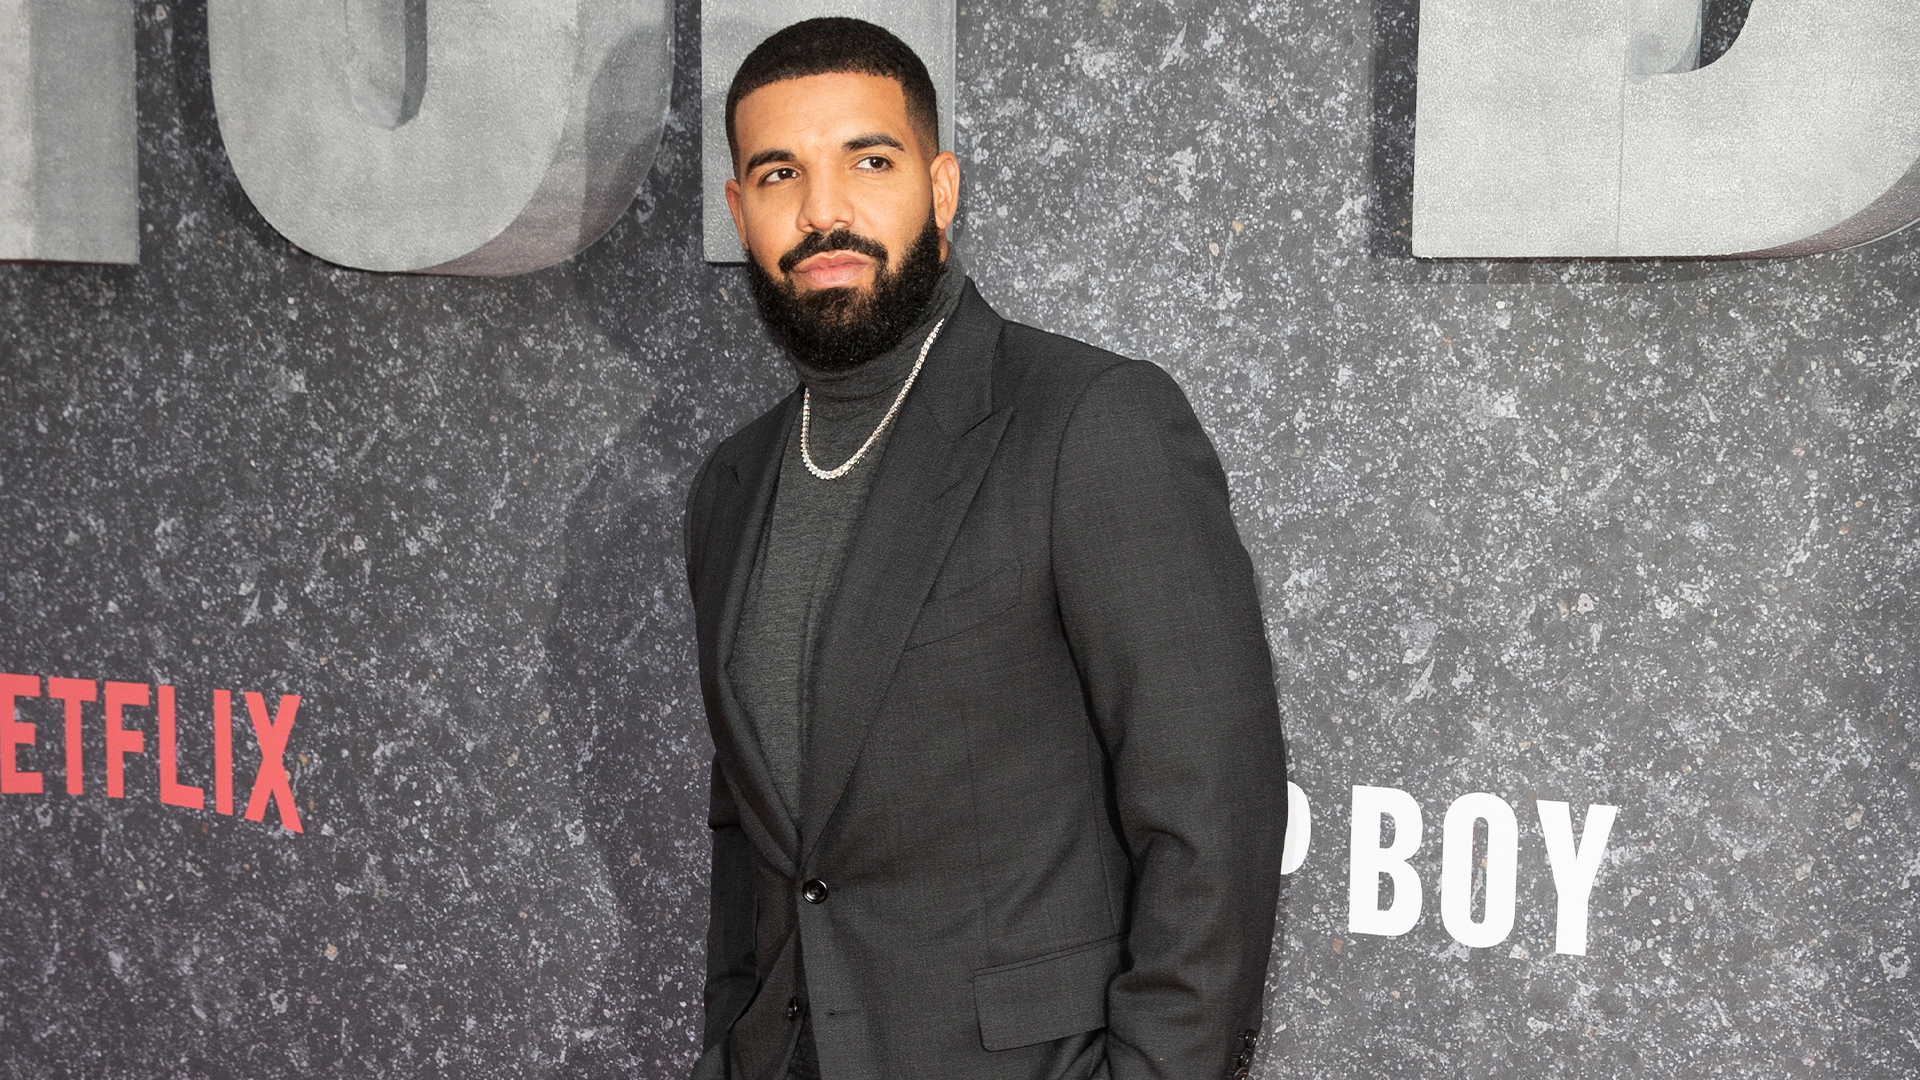 Drake Teams Up With Online Gambling Company Stake To Play To Win 'Real Money And Give It All To You'